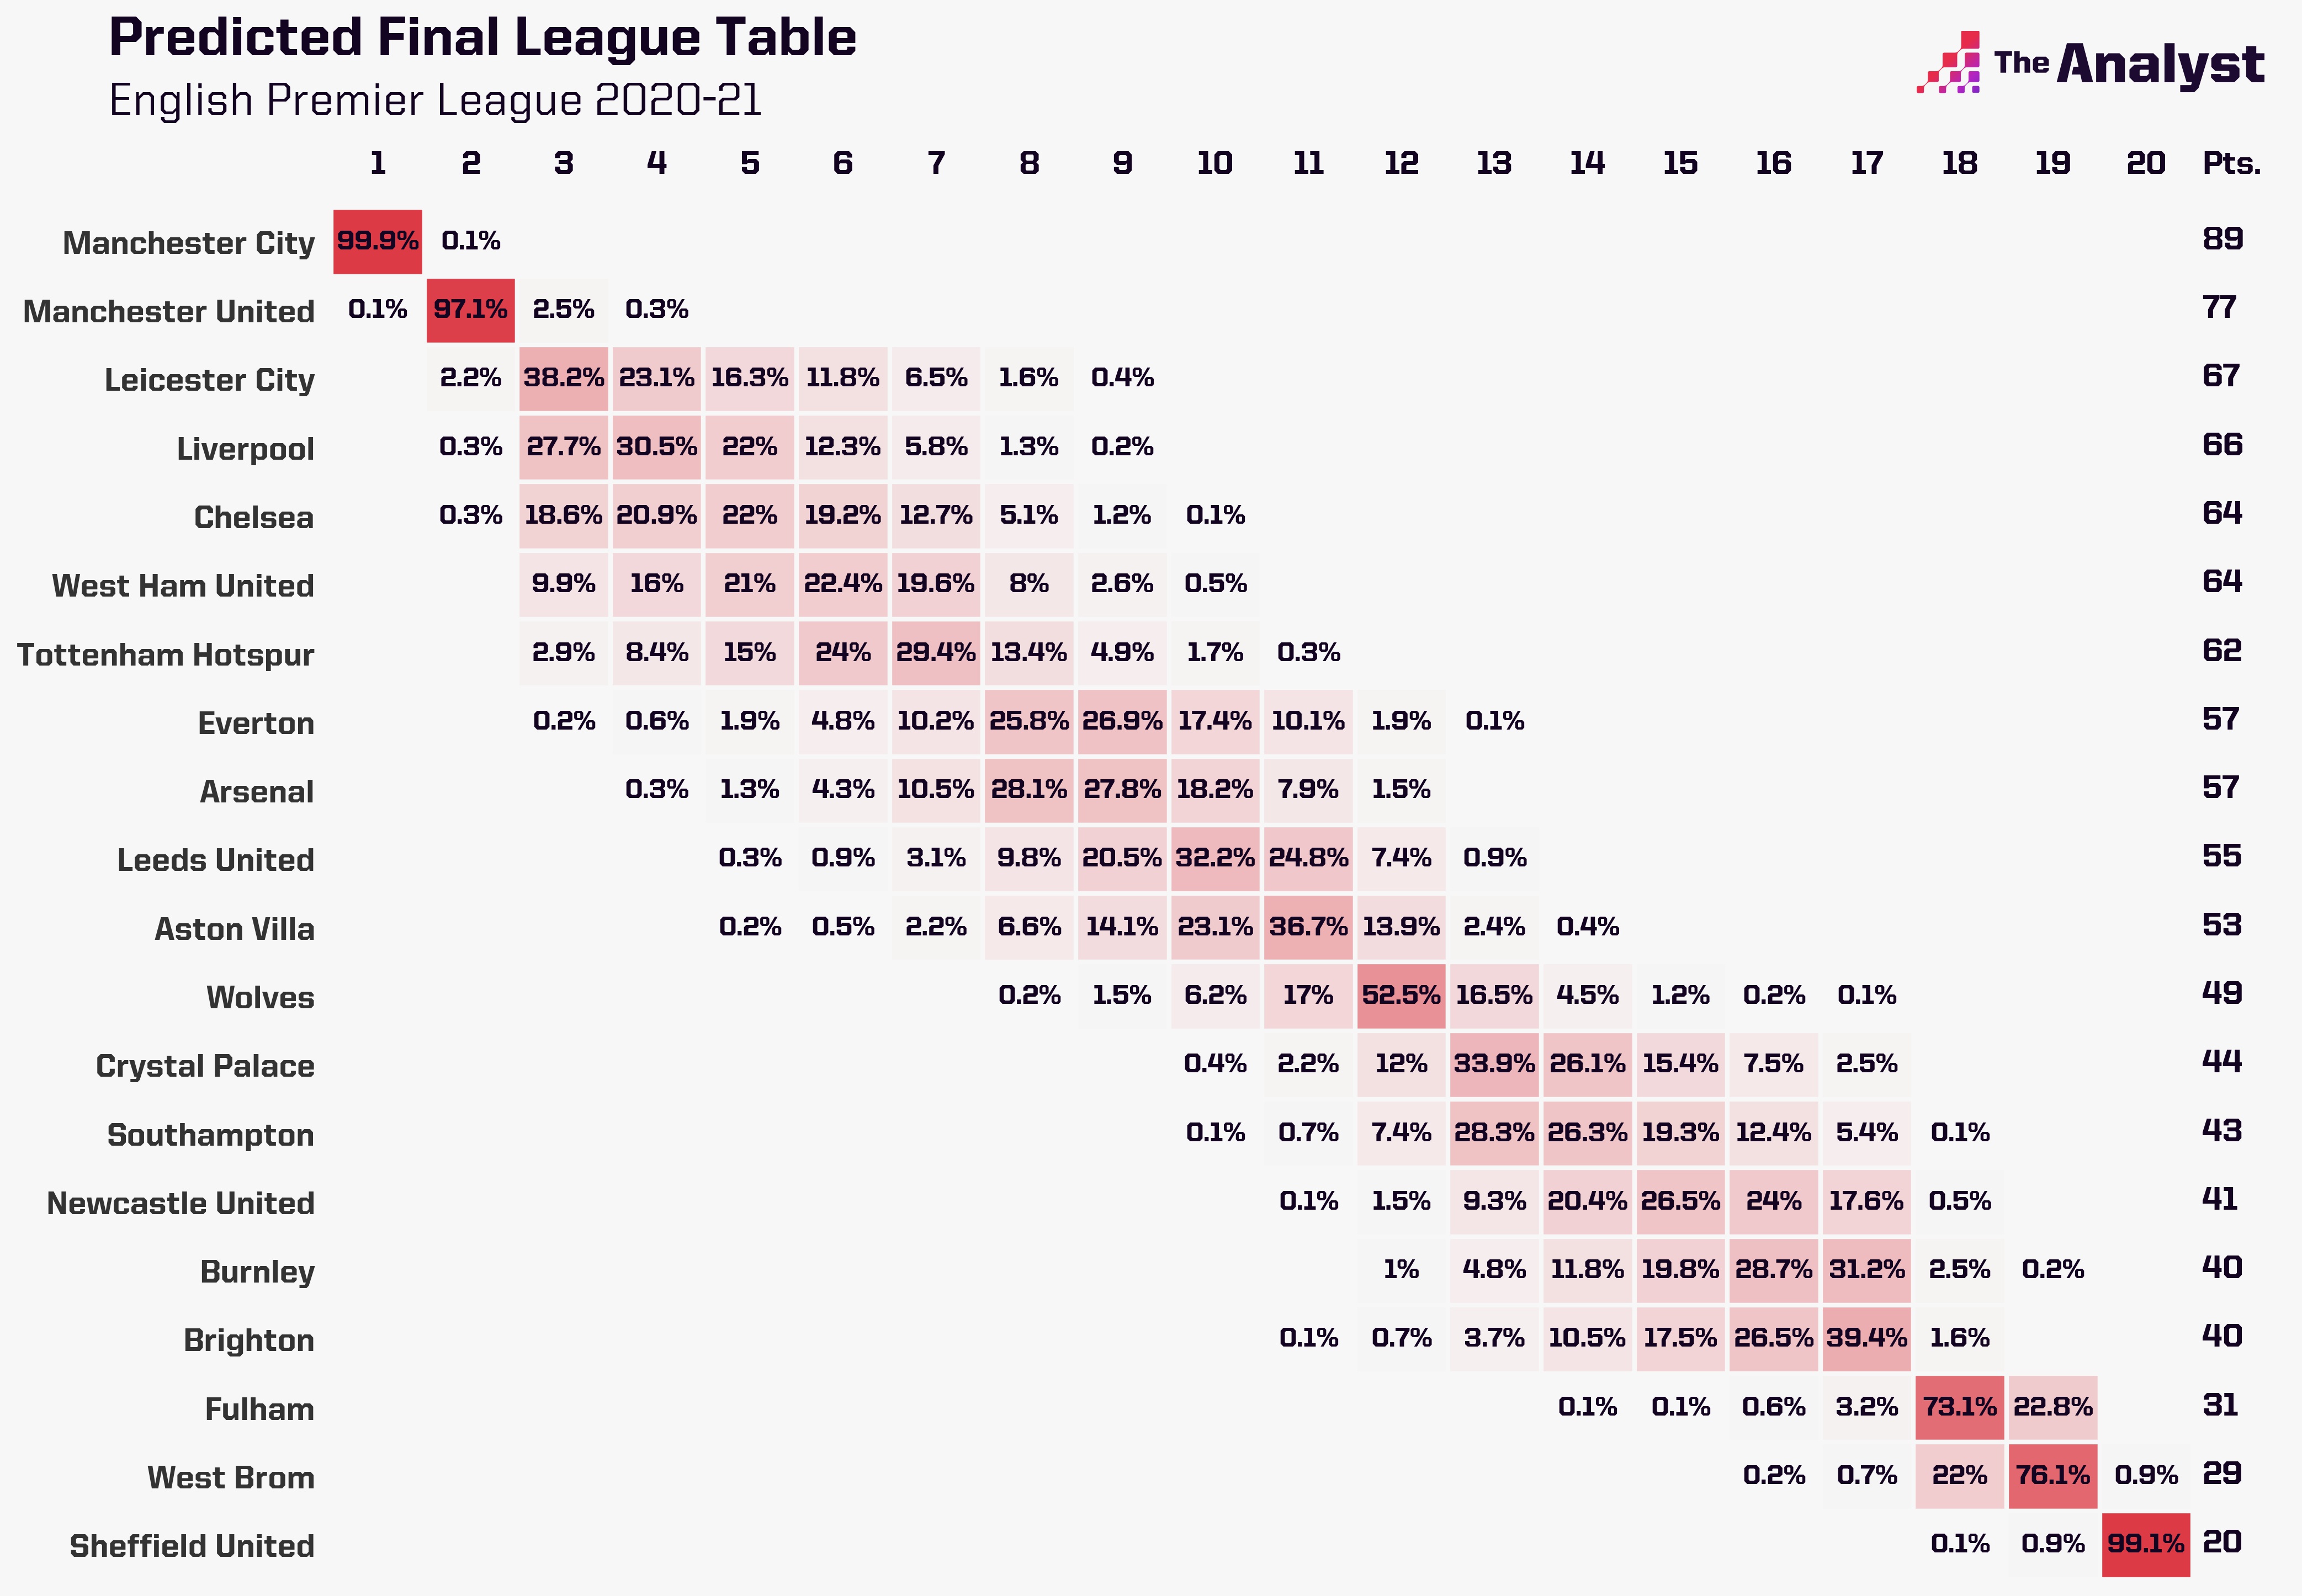 Stats Perform's AI prediction calculates West Ham have an almost 26 per cent chance of a top-four finish